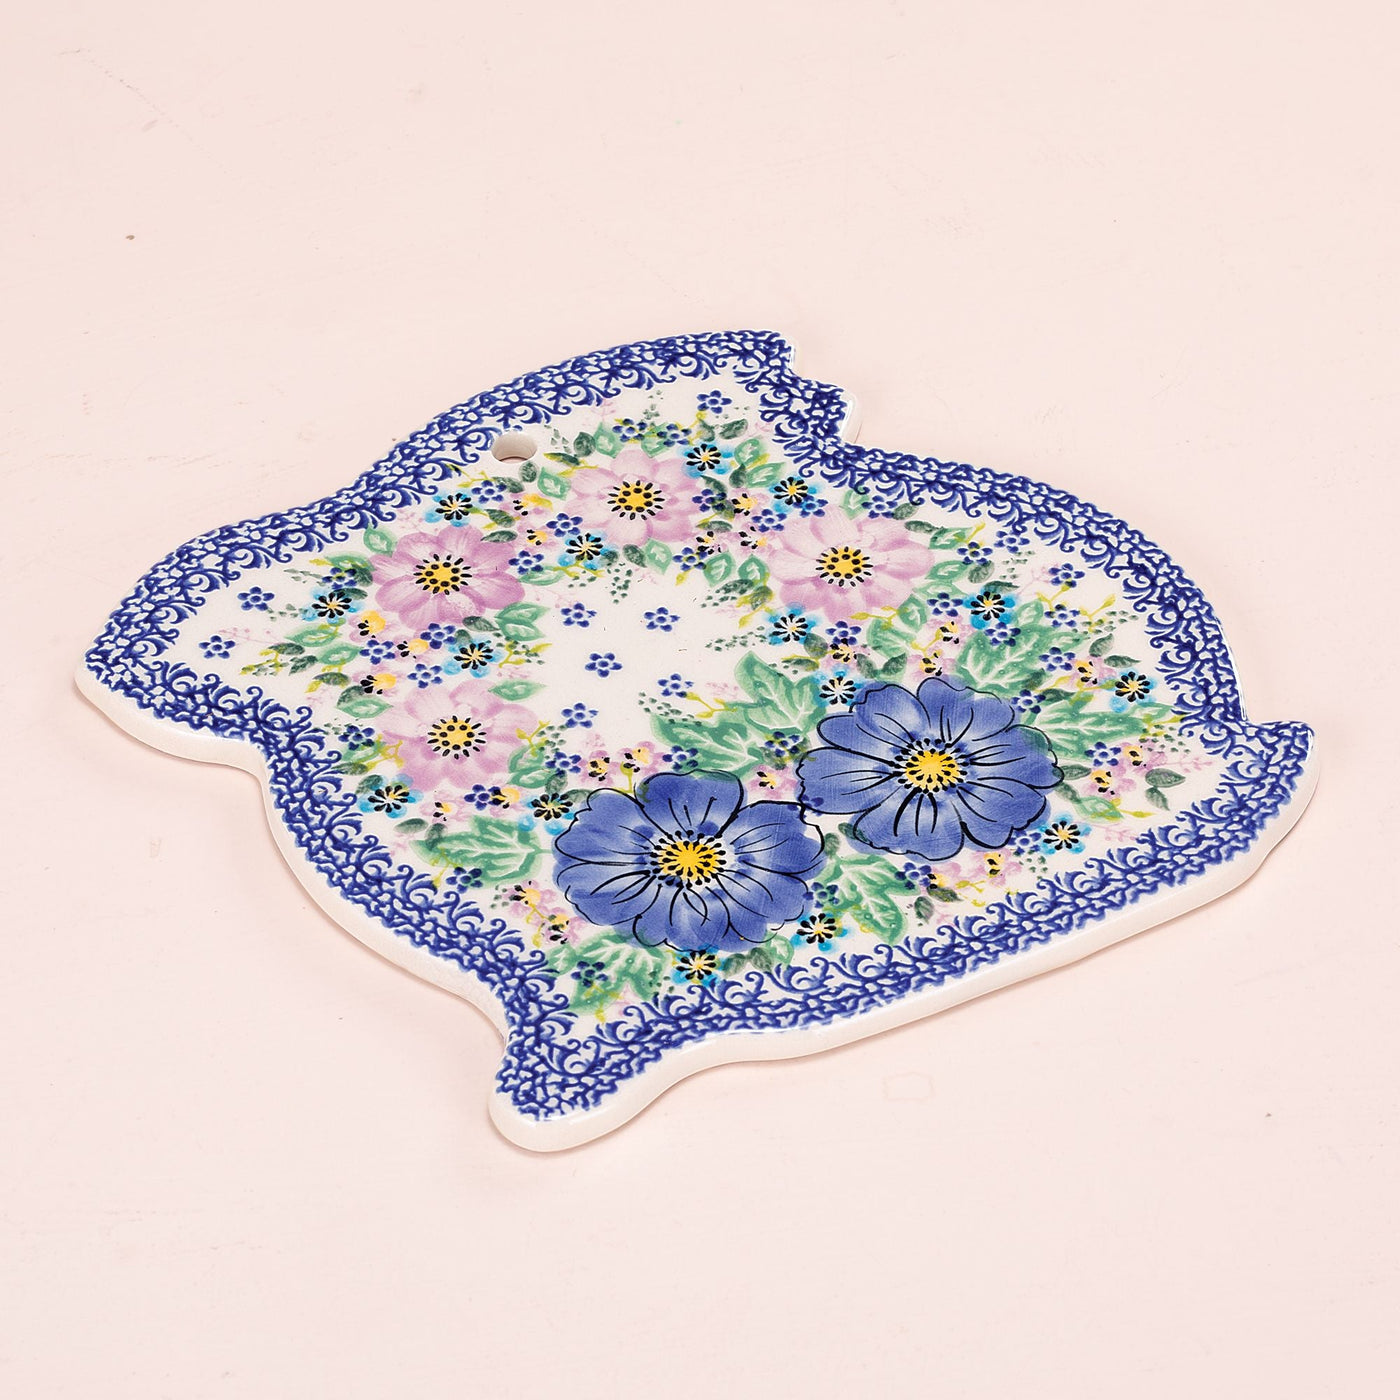 Polish Pottery Ring Around The Posies Bunny Plate